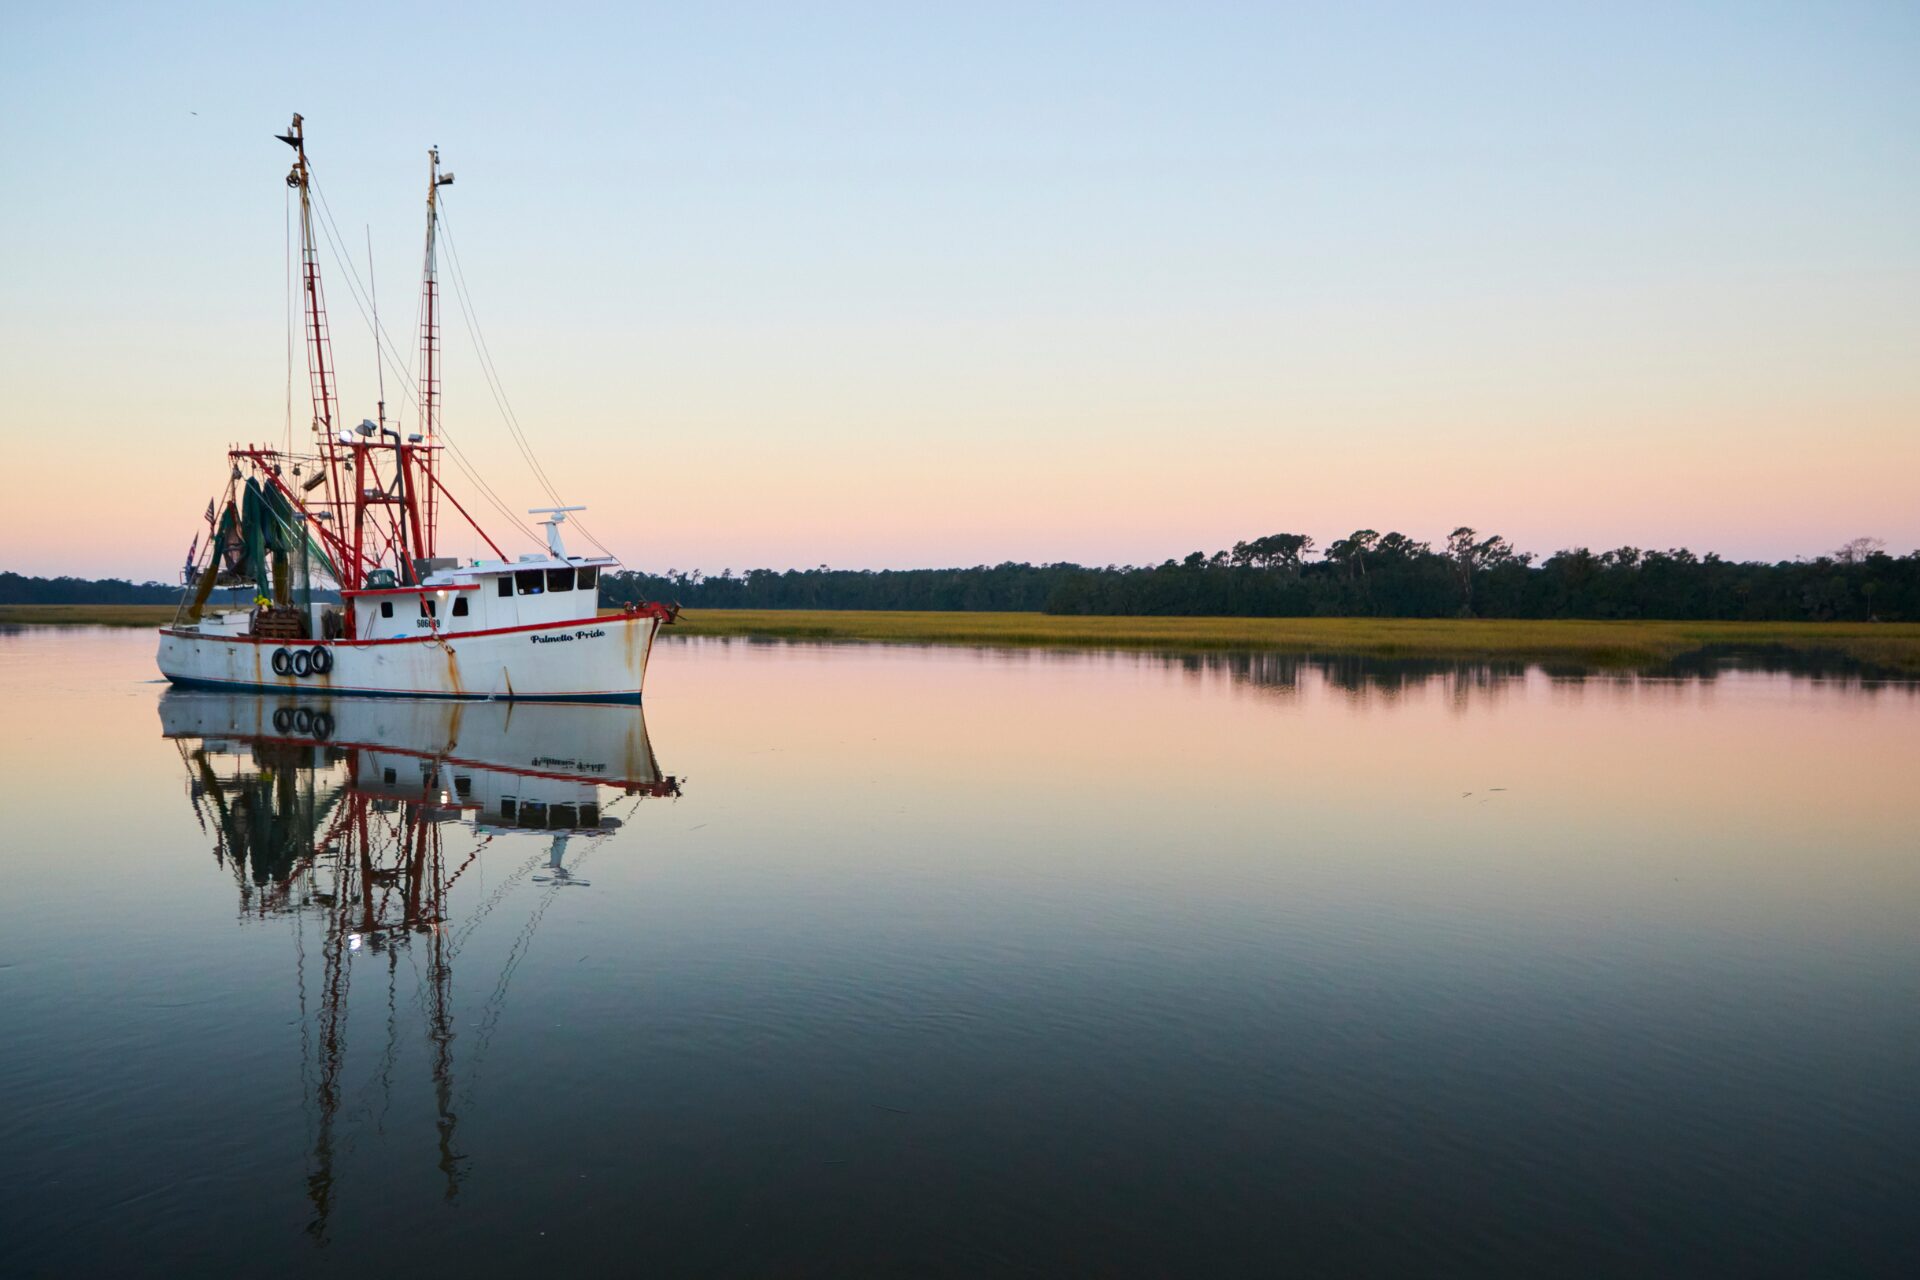 A boat in the South Carolina Lowcountry,